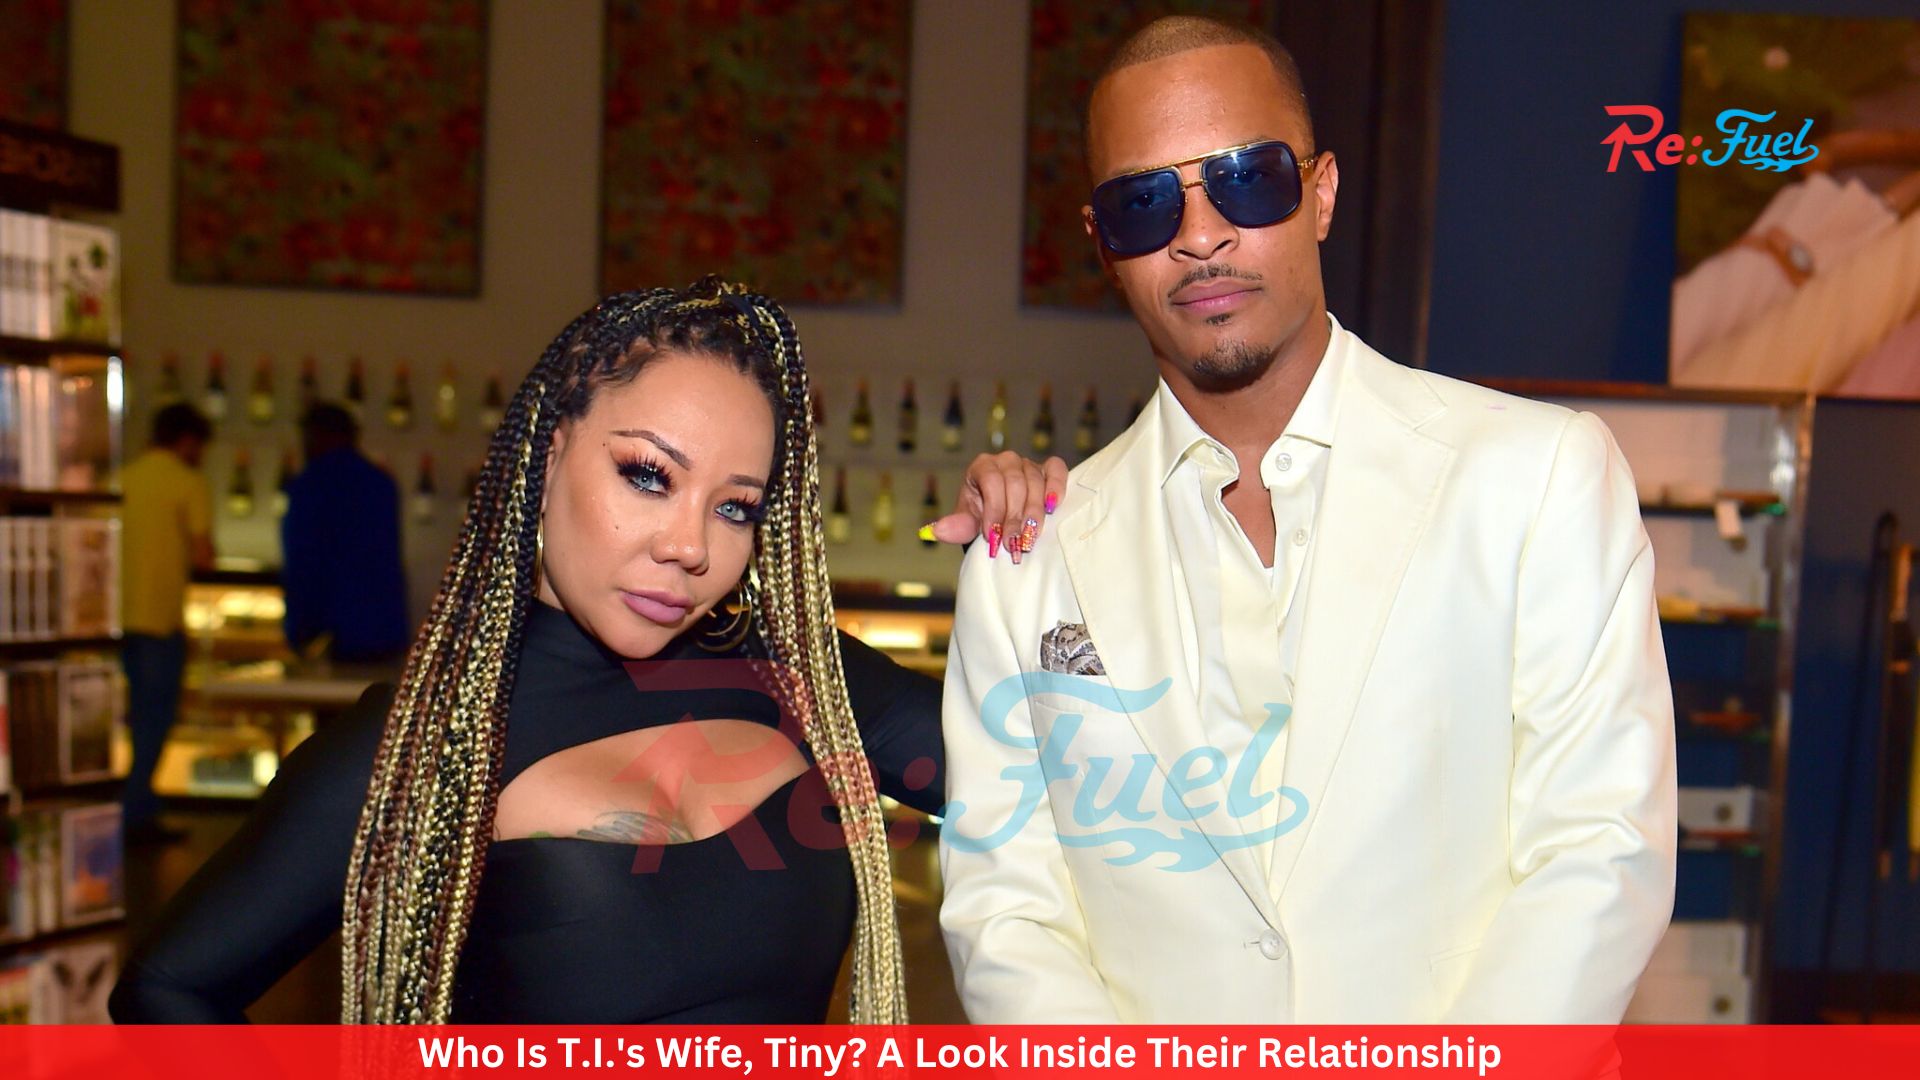 Who Is T.I.'s Wife, Tiny? A Look Inside Their Relationship